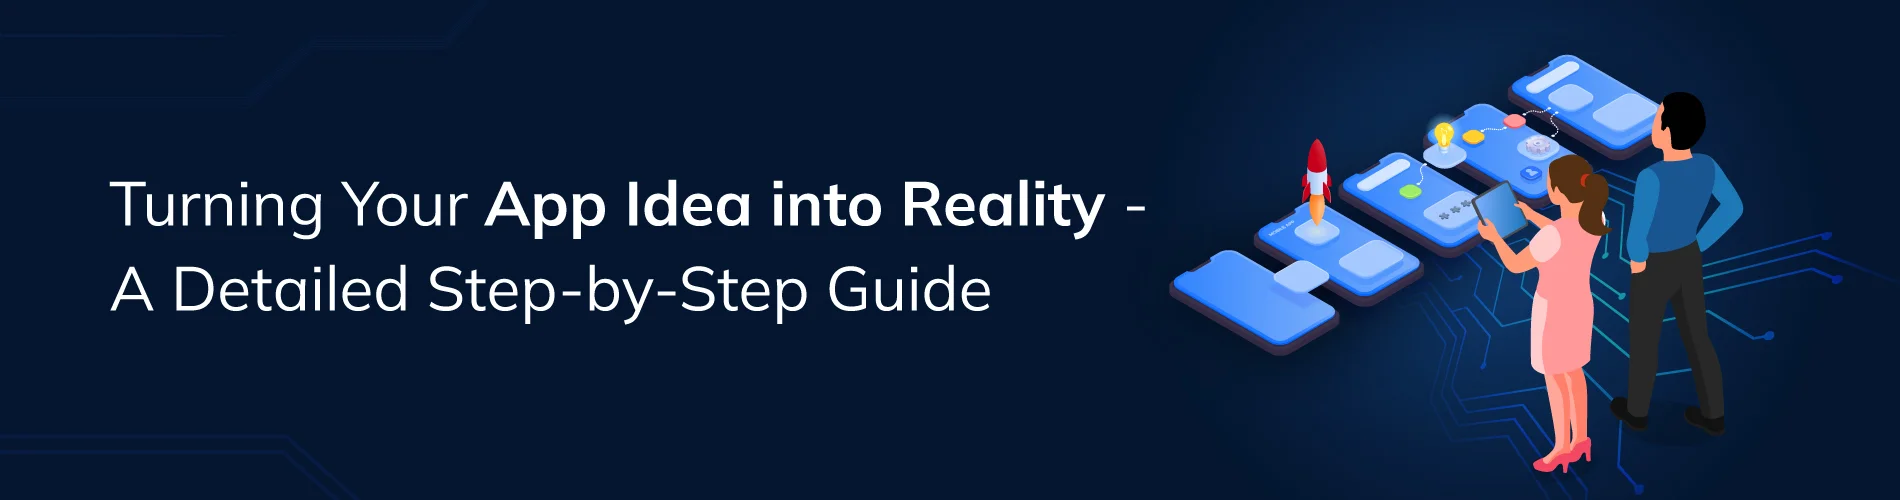 Turning Your App Idea into Reality- A Detailed Step-by-Step Guide